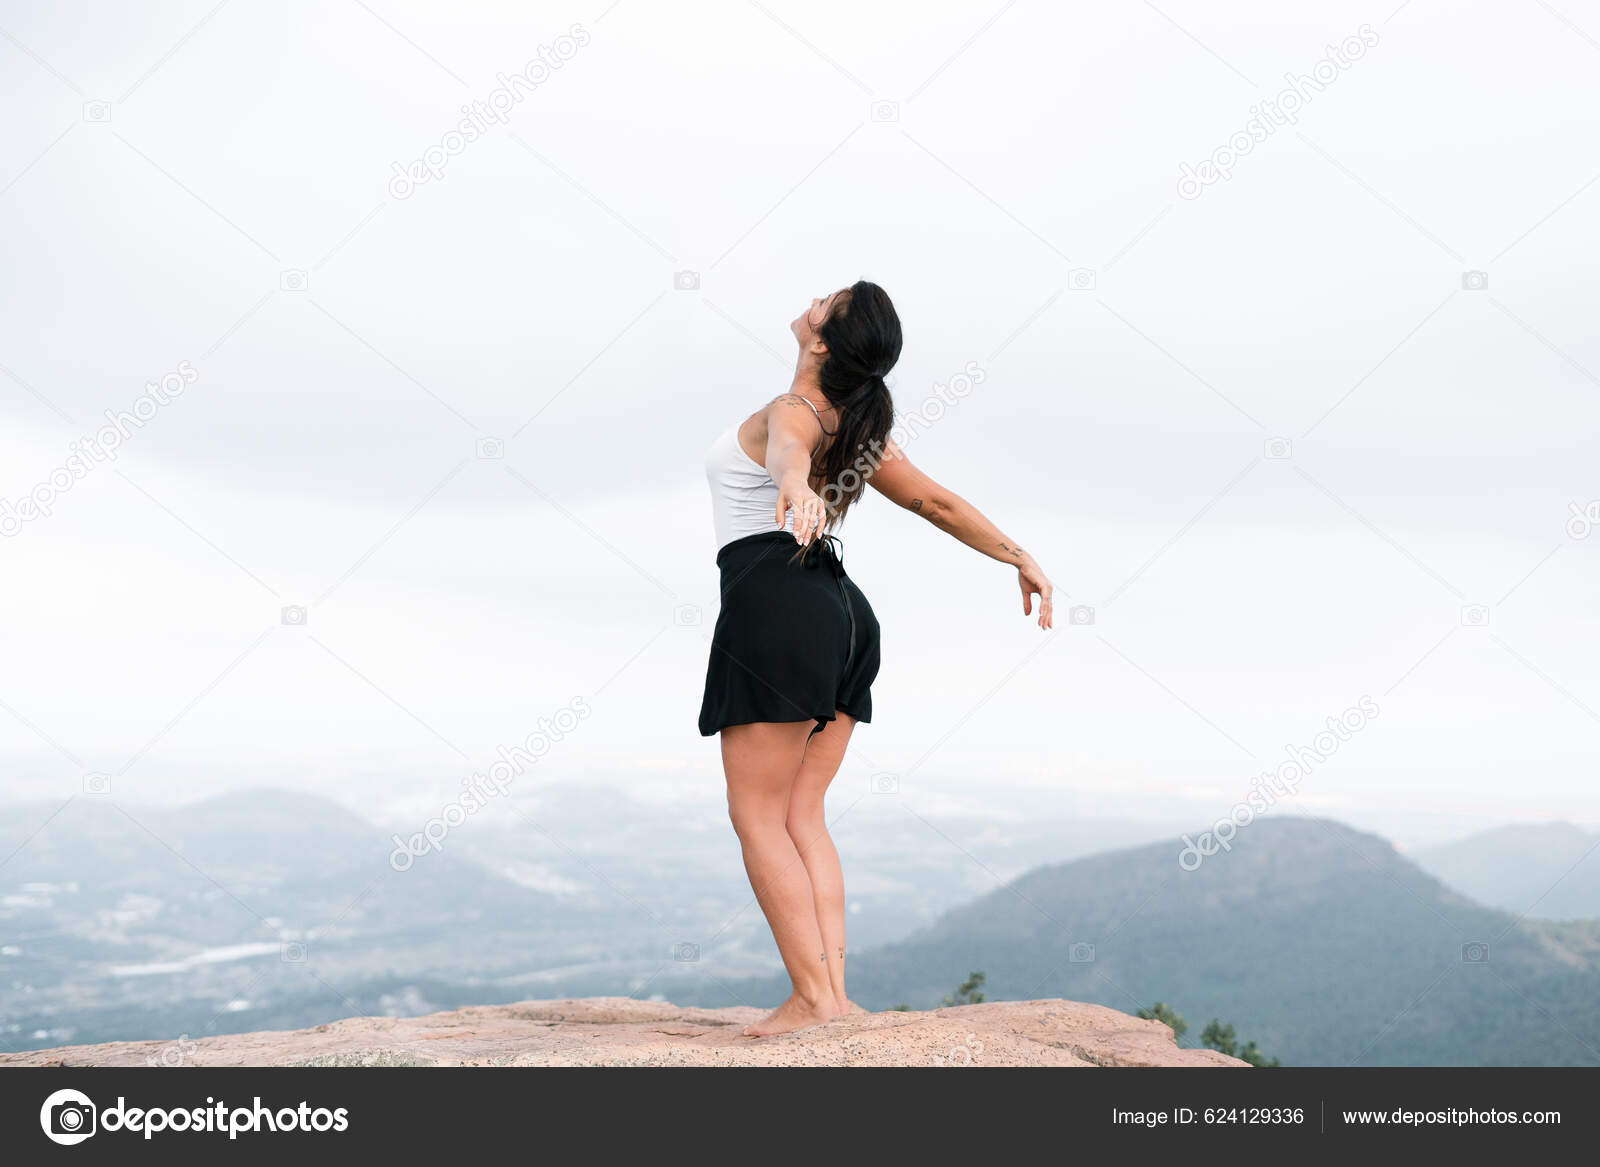 Scantily dressed woman Stock Photos and Images